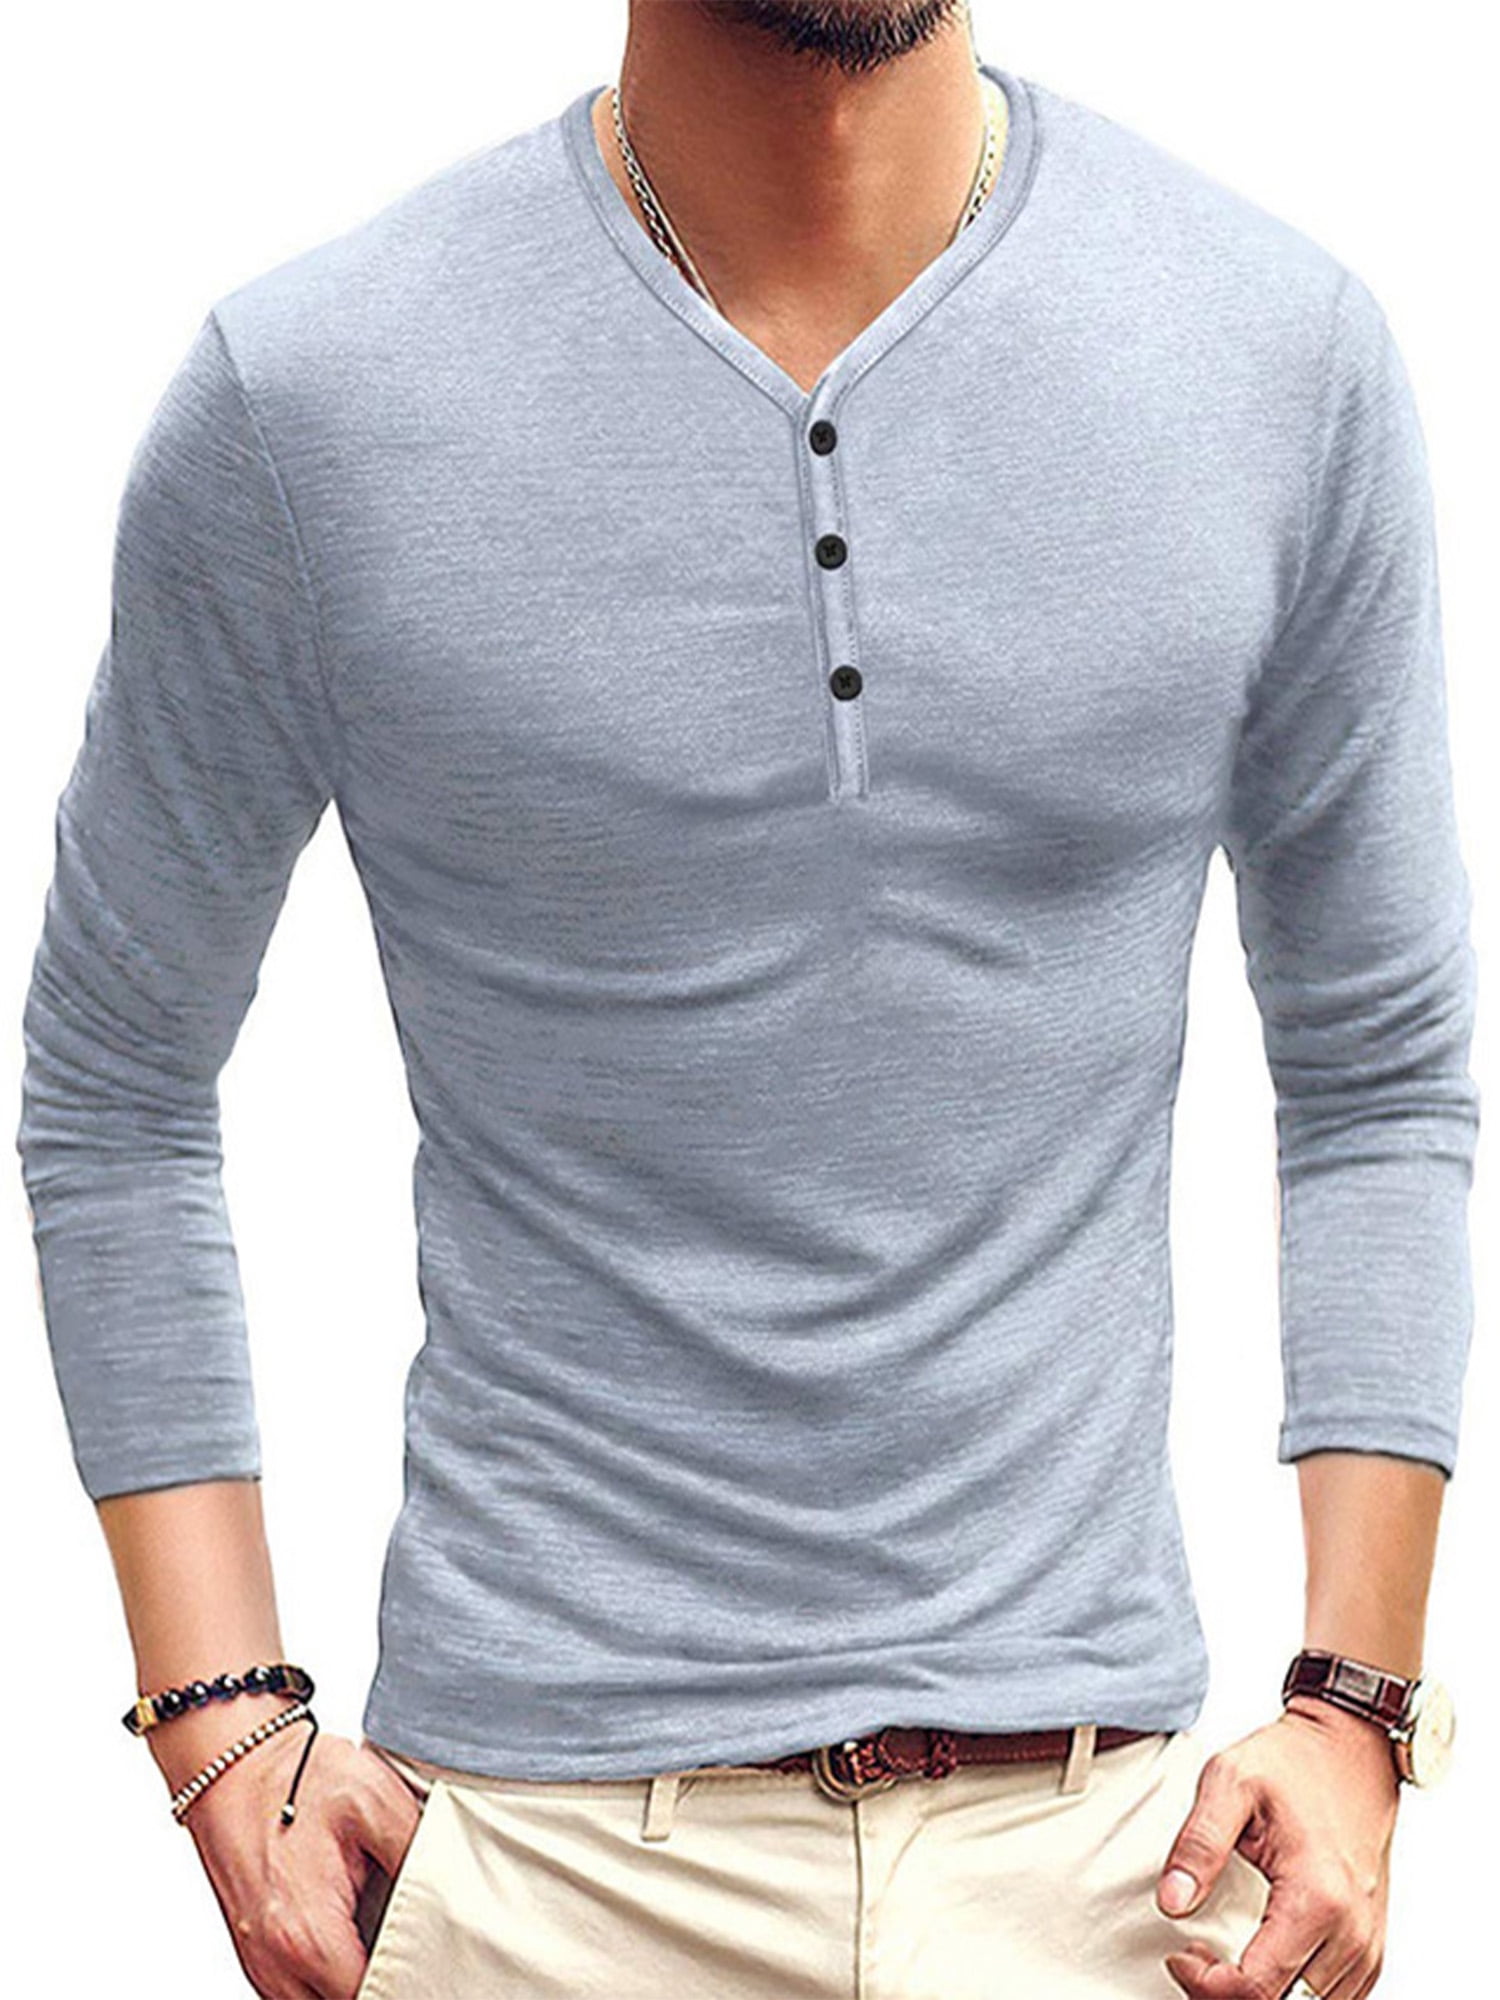 Mens Henley Long Sleeve Shirts Casual Fashion Tops Solid Color Button T-Shirt